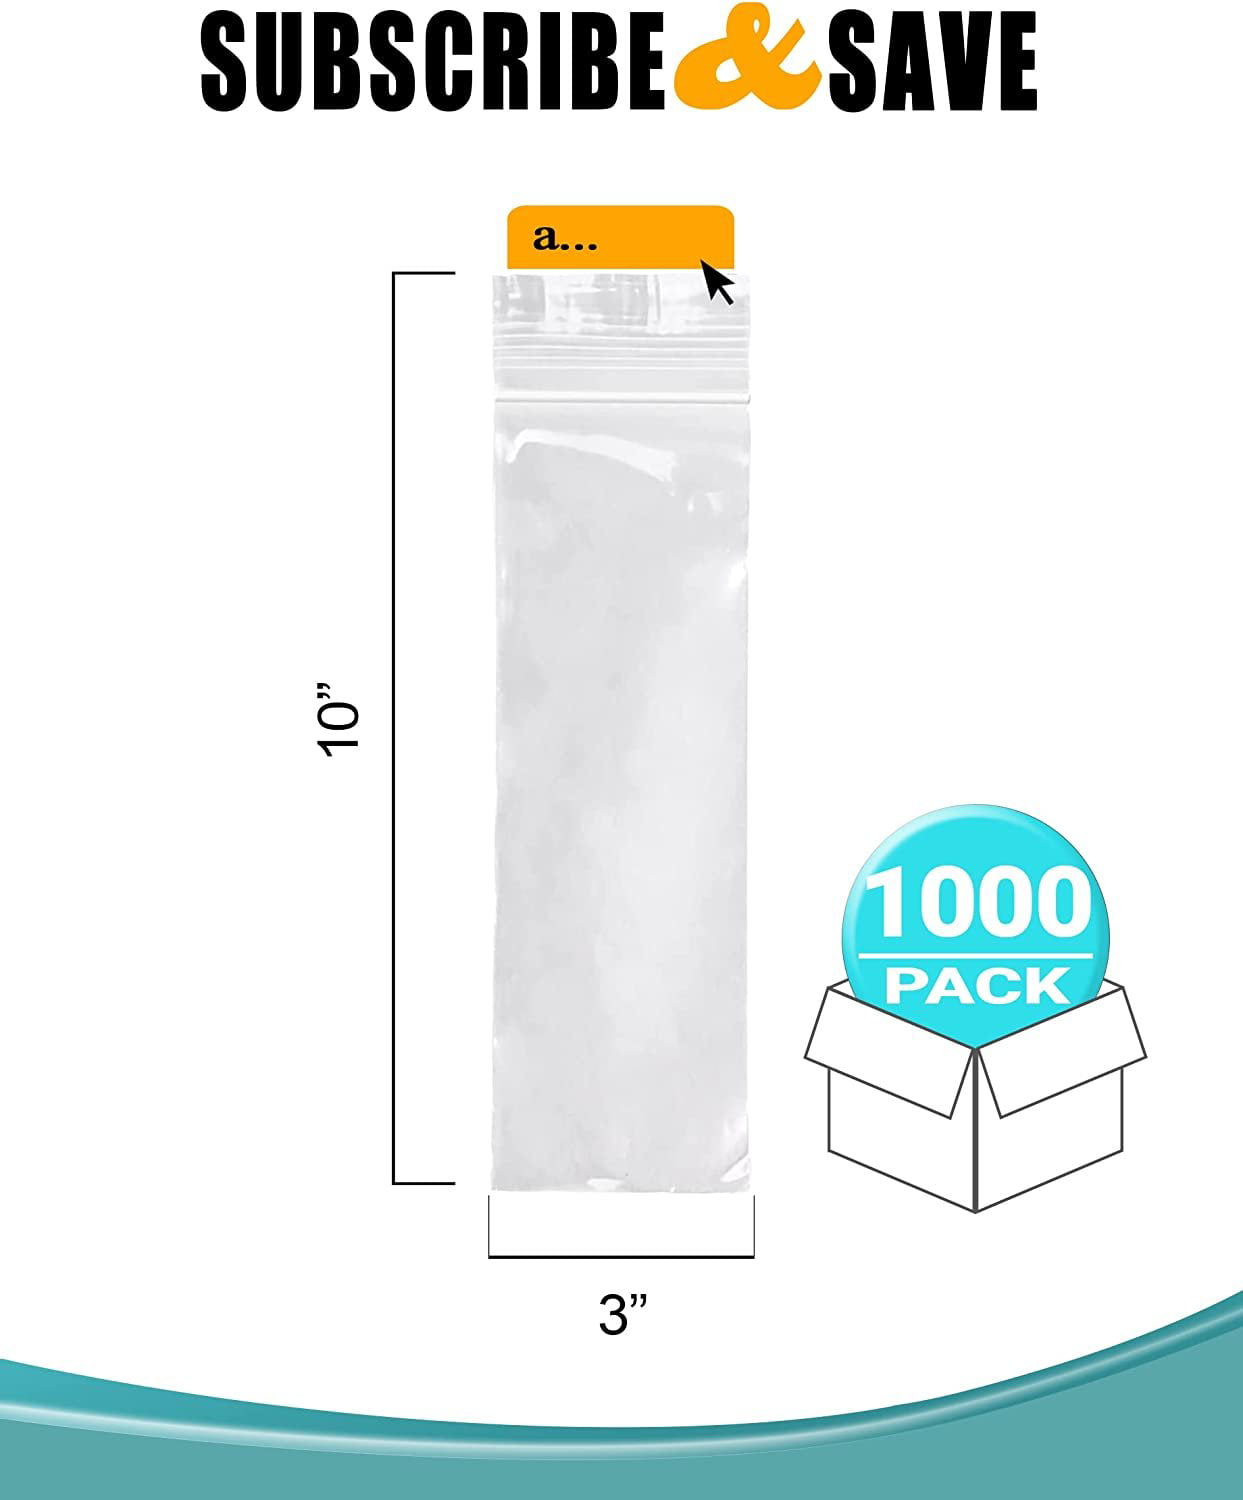 Clear Plastic Reusable Zip Bags - Bulk GPI Case of 1000 3 x 4 2 mil Thick  Strong & Durable Poly Baggies with Resealable Zip Top Lock for Travel